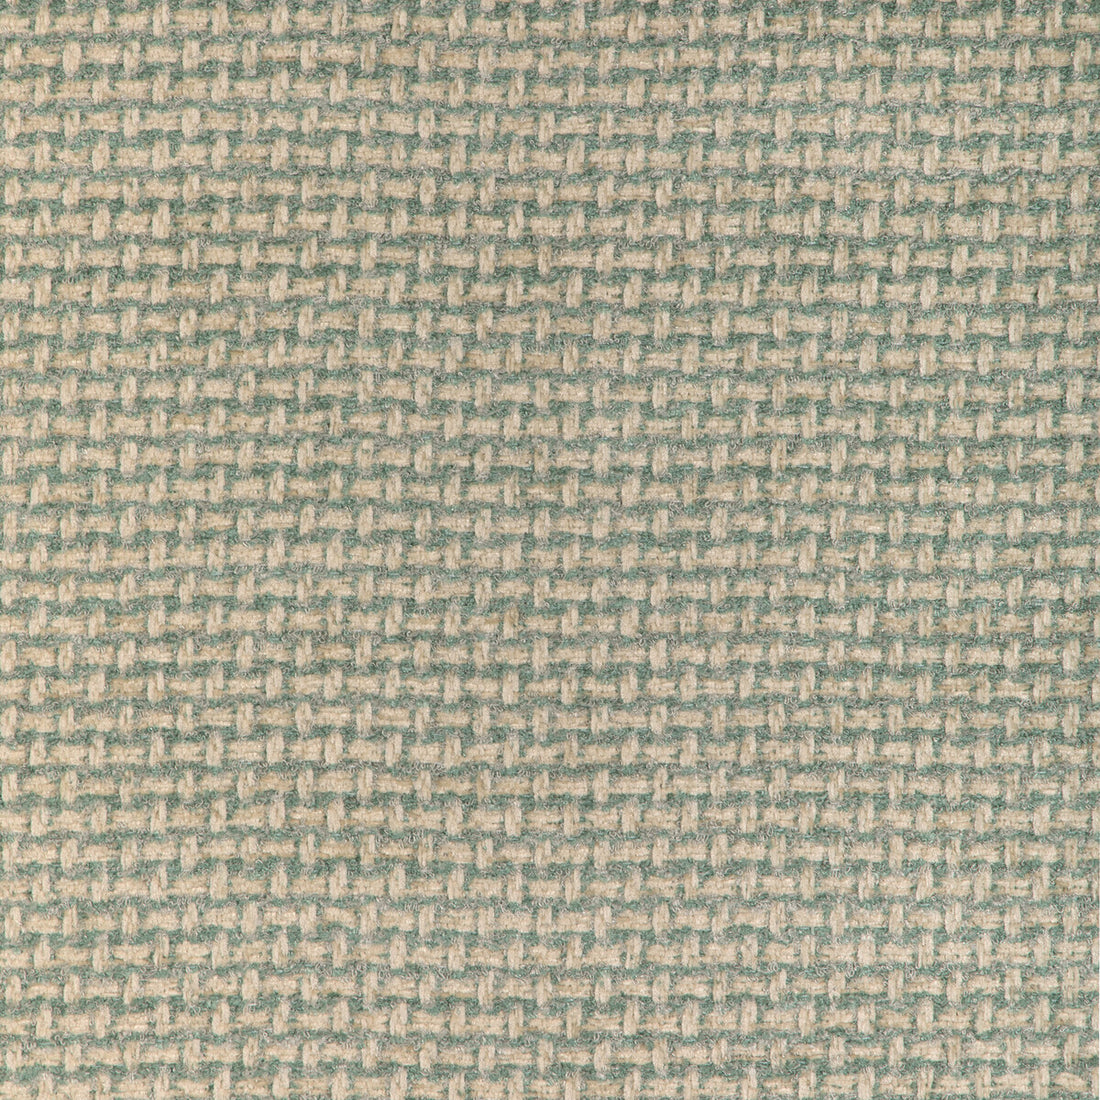 Nivolet Texture fabric in mist color - pattern 8023154.113.0 - by Brunschwig &amp; Fils in the Chambery Textures IV collection